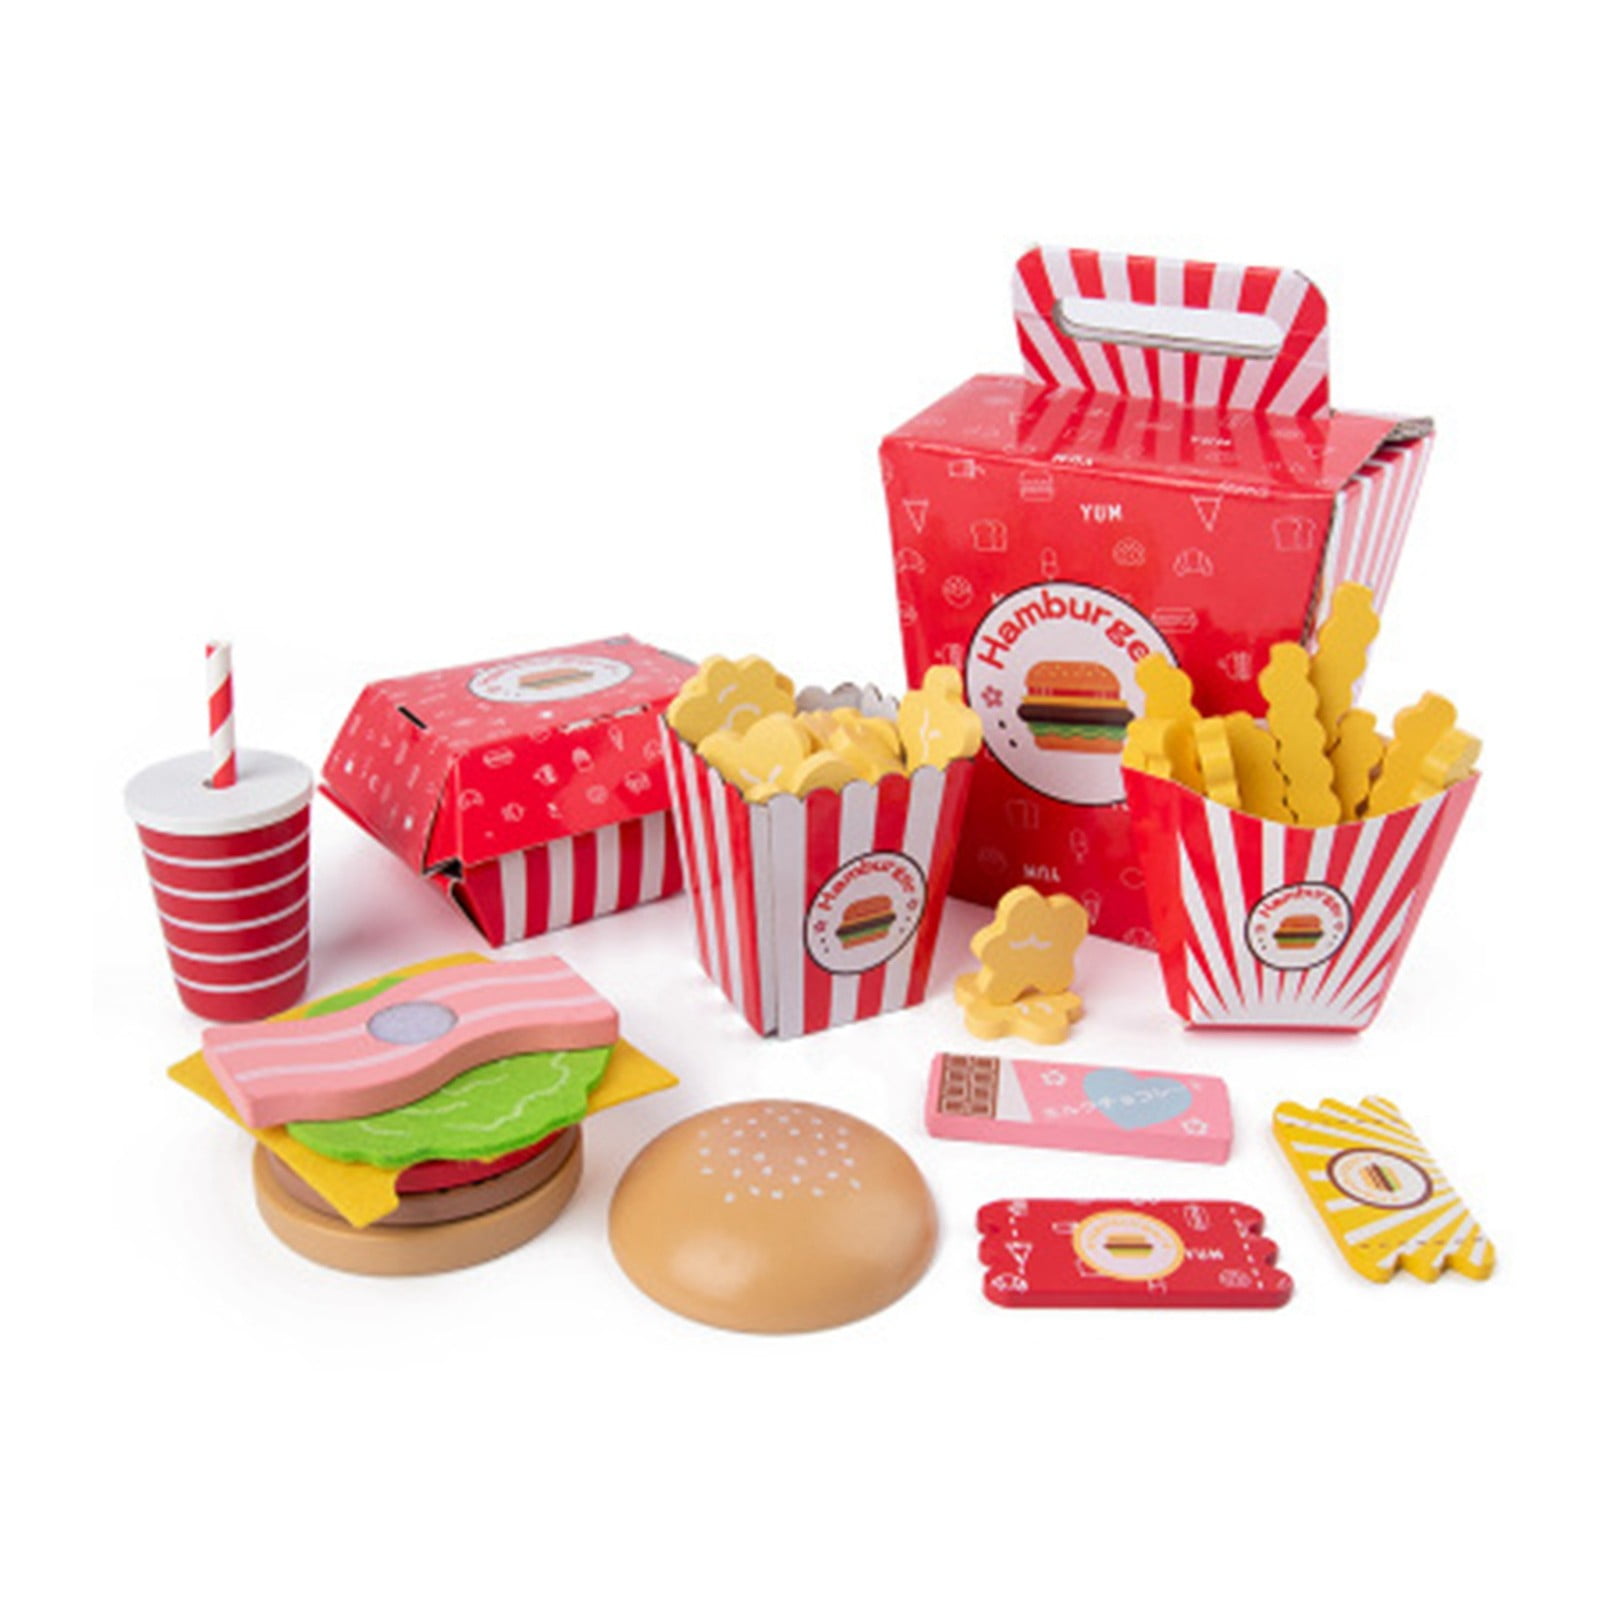 Plastic Fast Food Toy Mini Hamburg French Fries Pretend Play Best Gift for Kids 